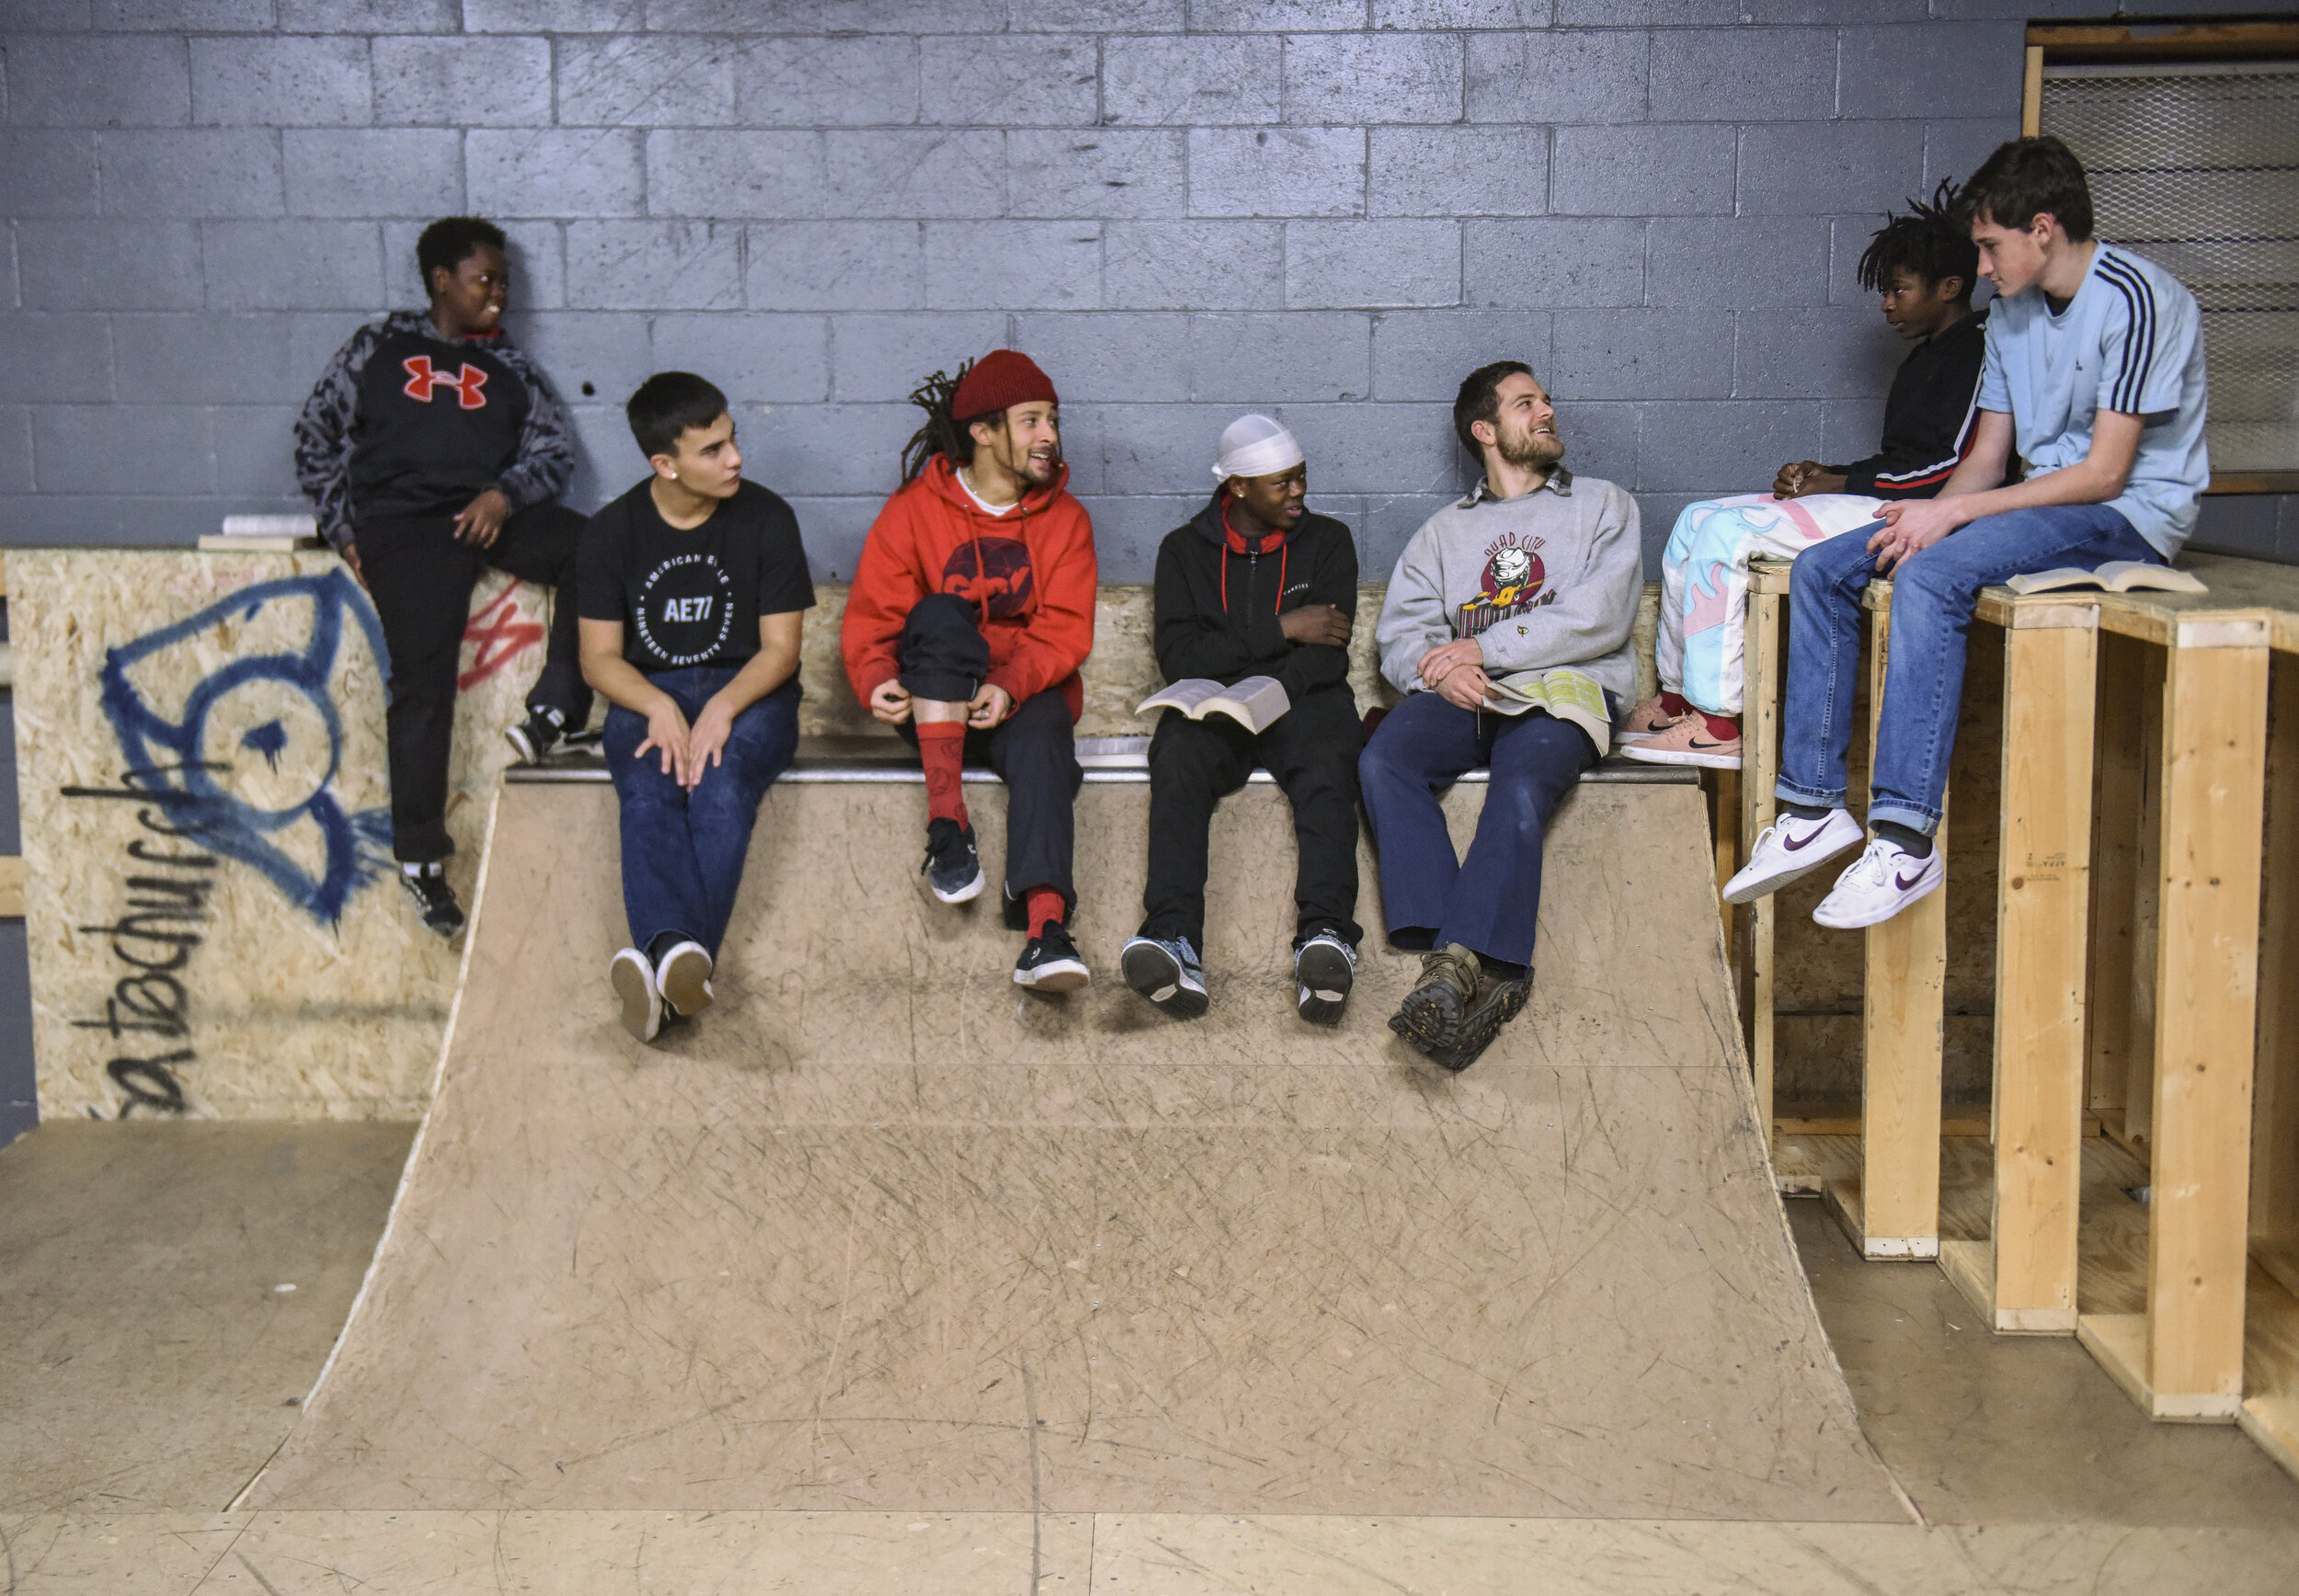  Connor LaBorde, third from right, skate pastor at The Center, leads a Bible study about peace with a group of young men who frequently attend Skate Church Dec. 13 in Davenport. 